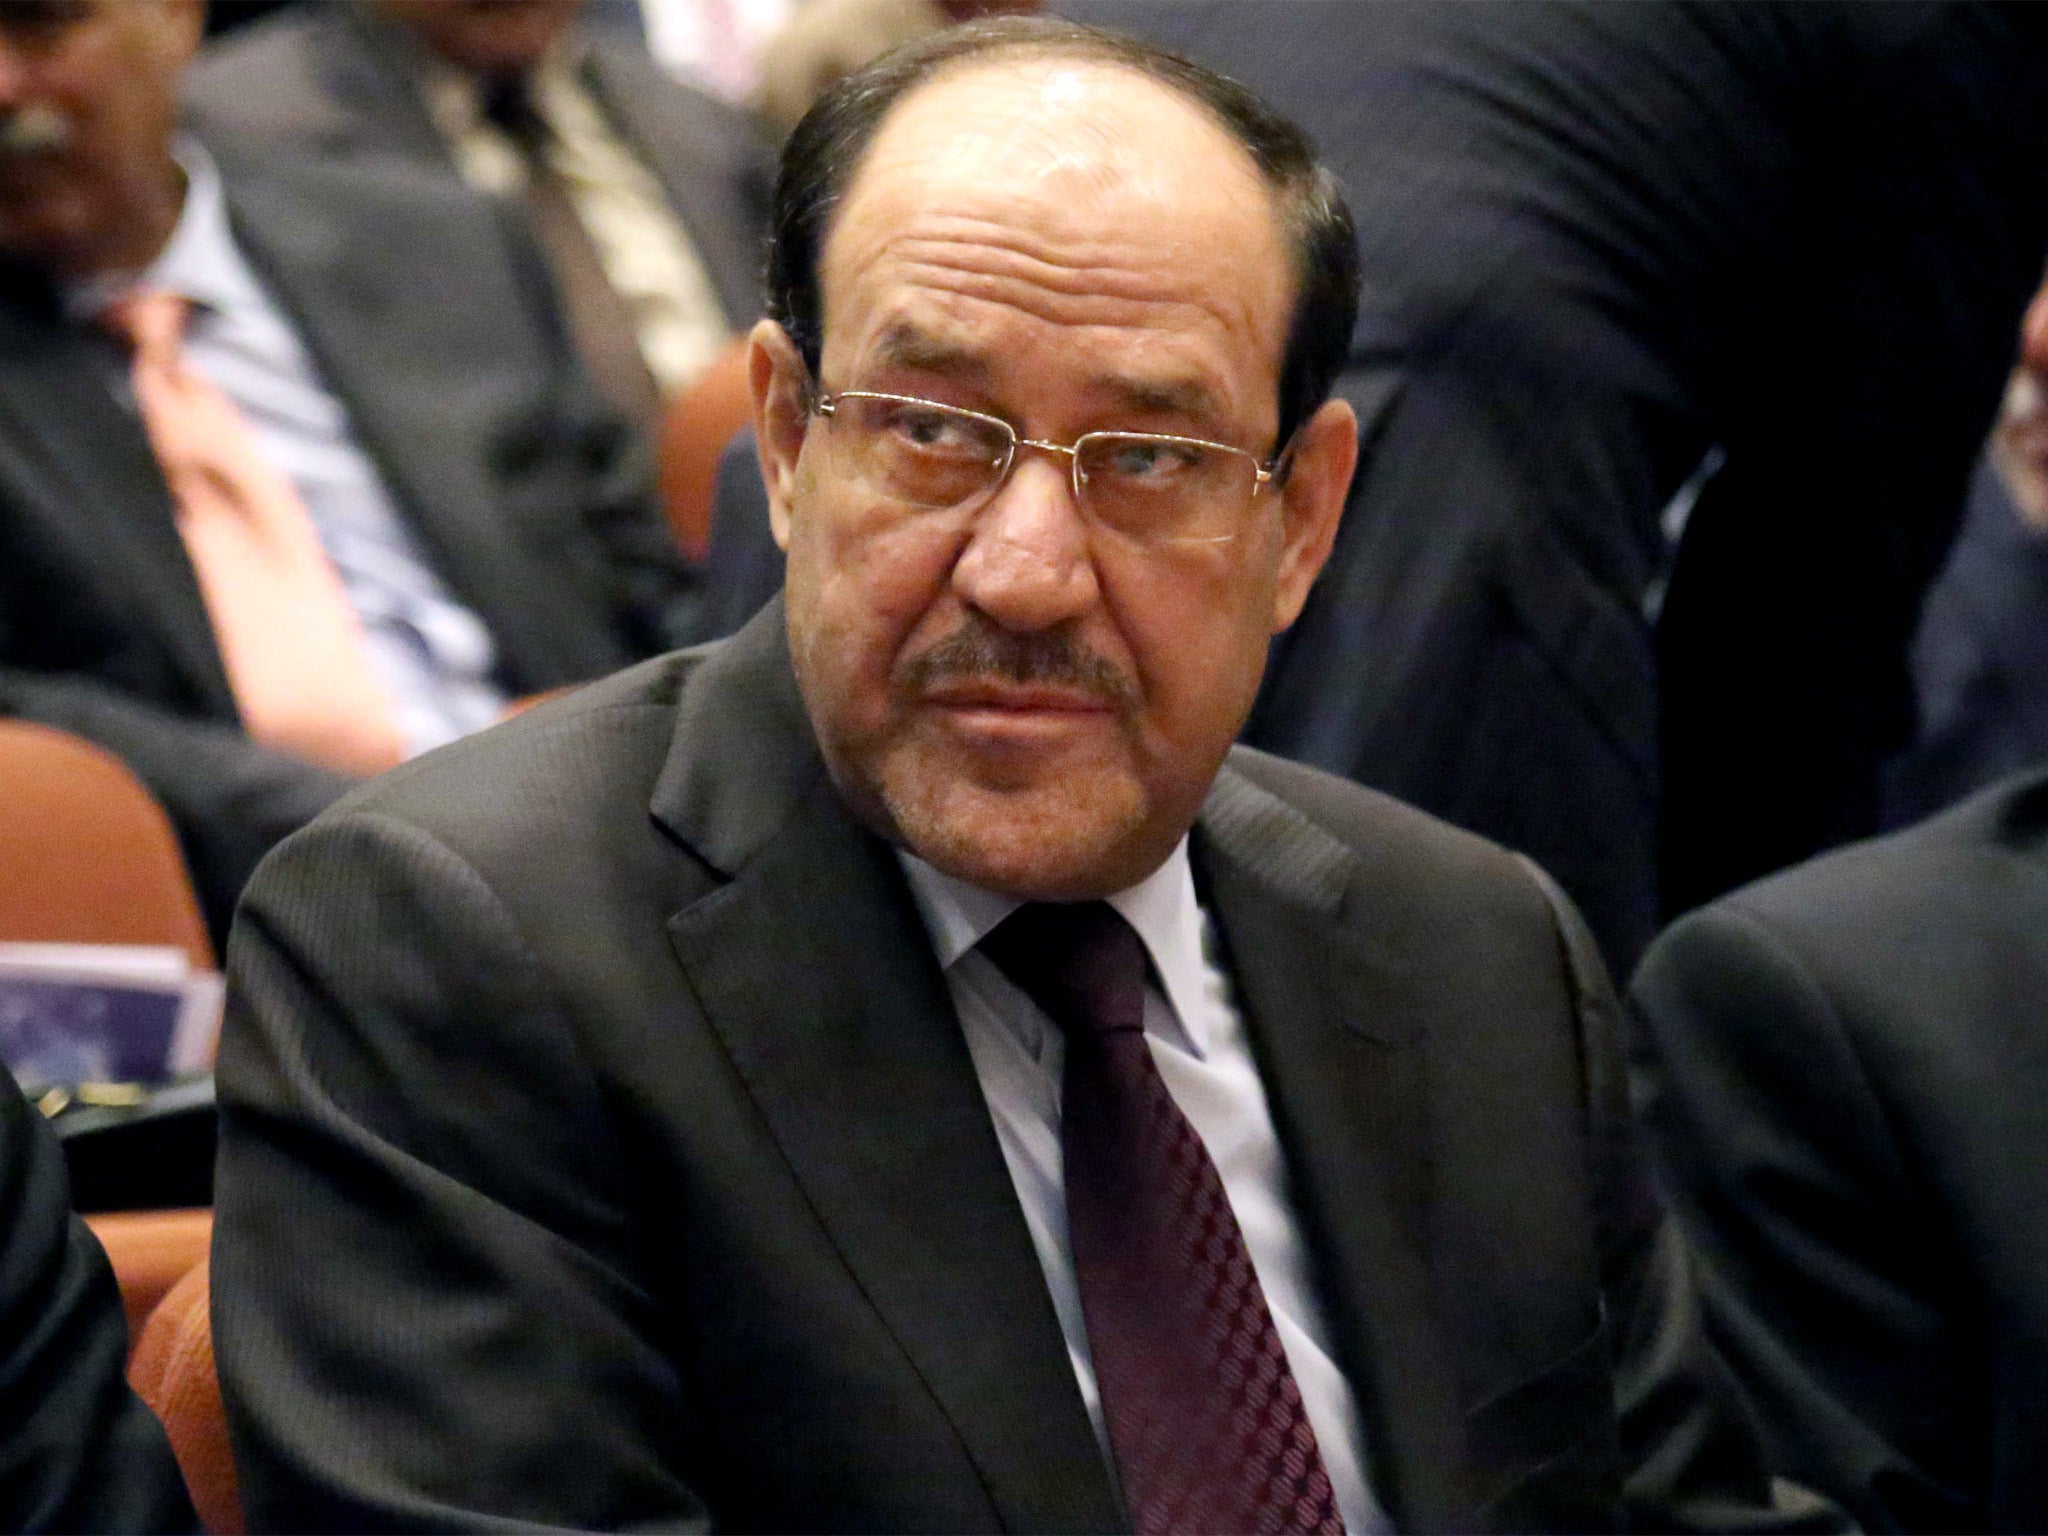 Iraqi Prime Minister, Nouri al-Maliki, accused the Kurdish zone of being a haven for Islamic extremists